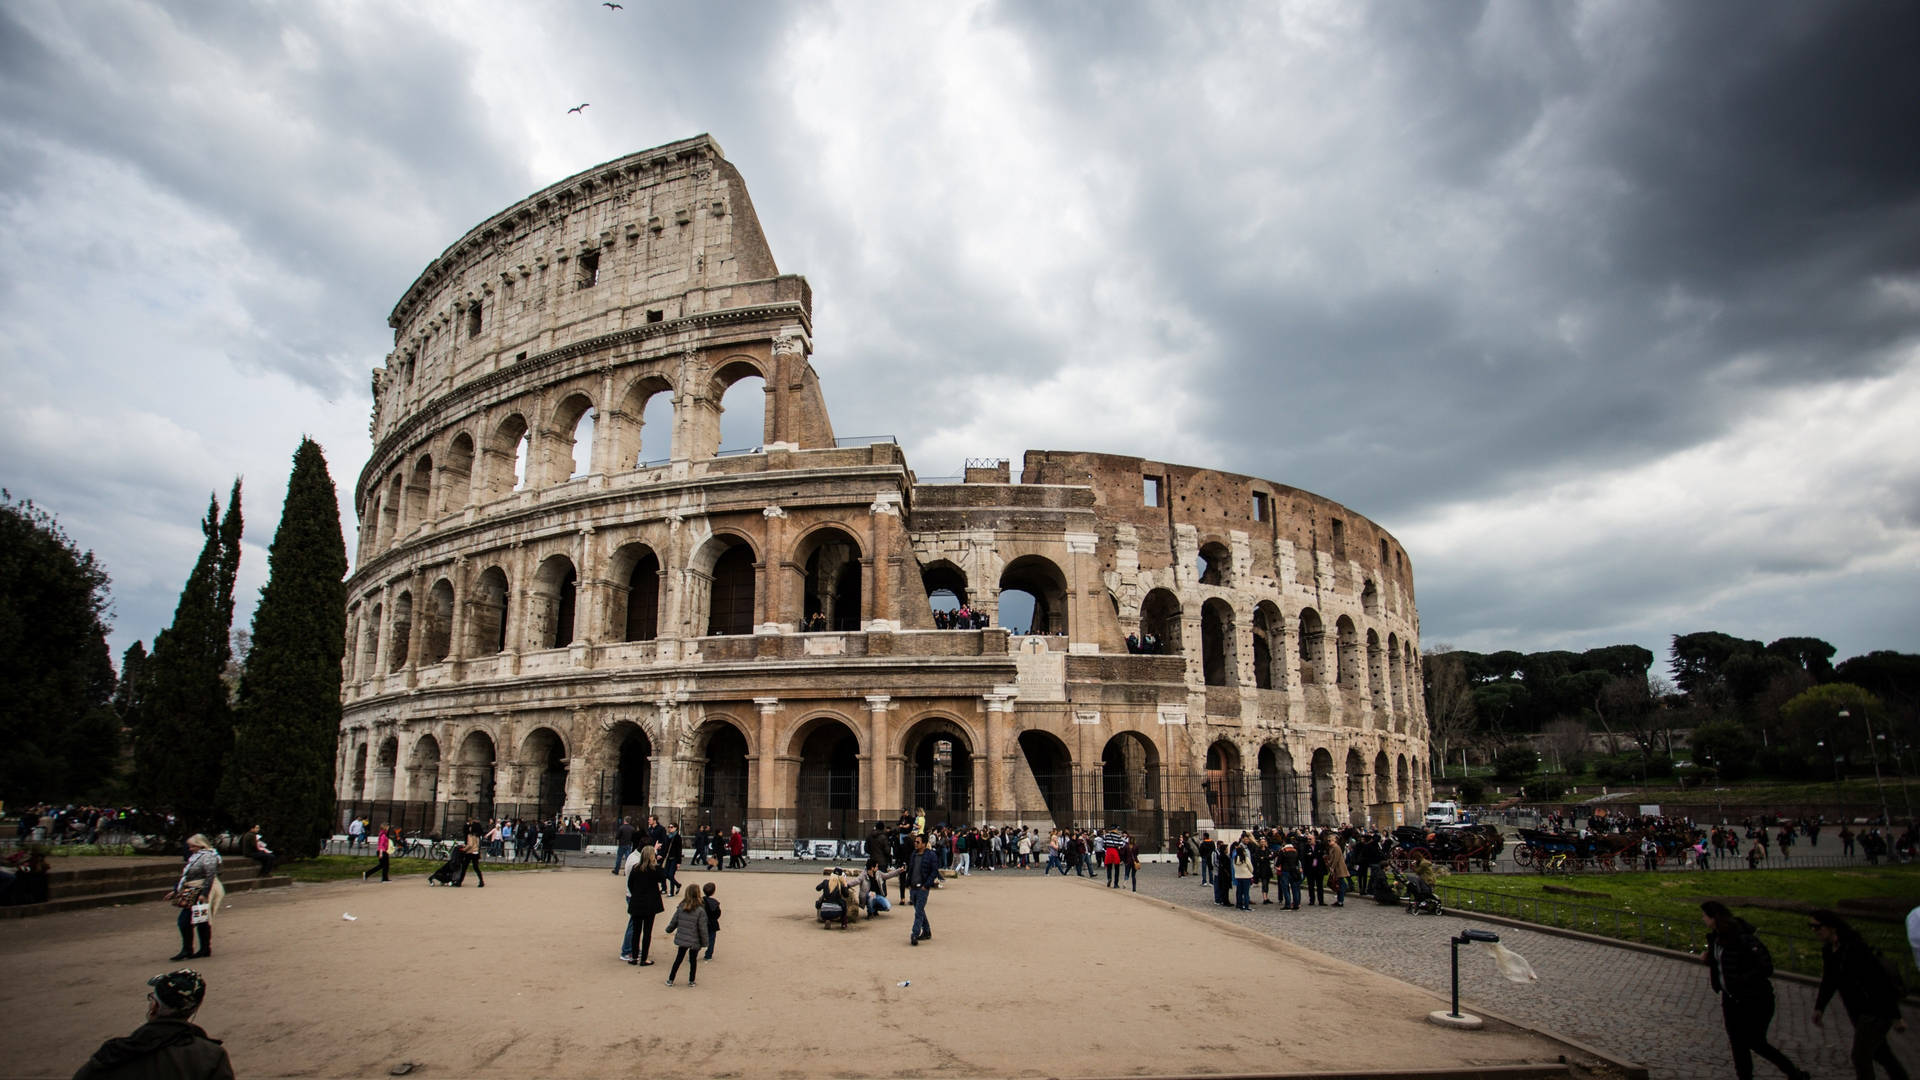 Colosseum In Rome Beneath The Cloudy Sky Wallpaper